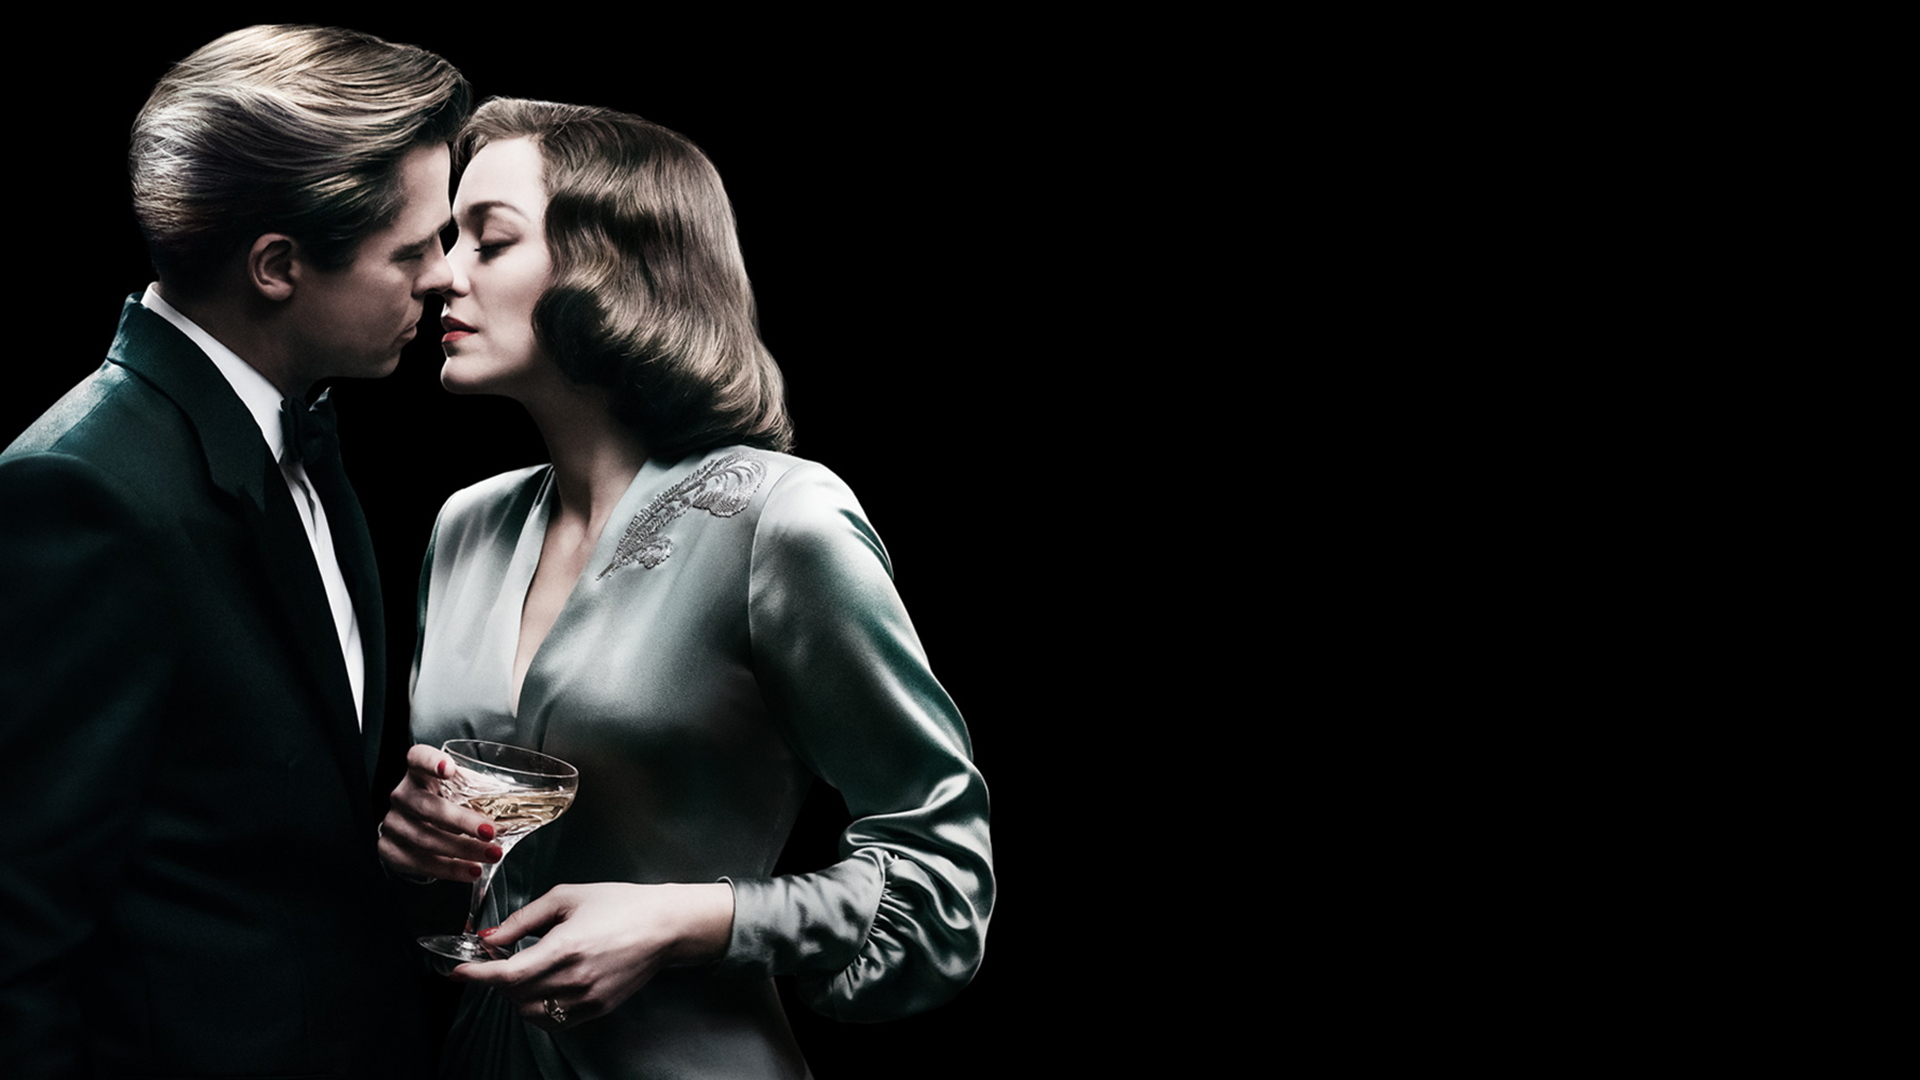 Movie Allied HD Wallpaper | Background Image